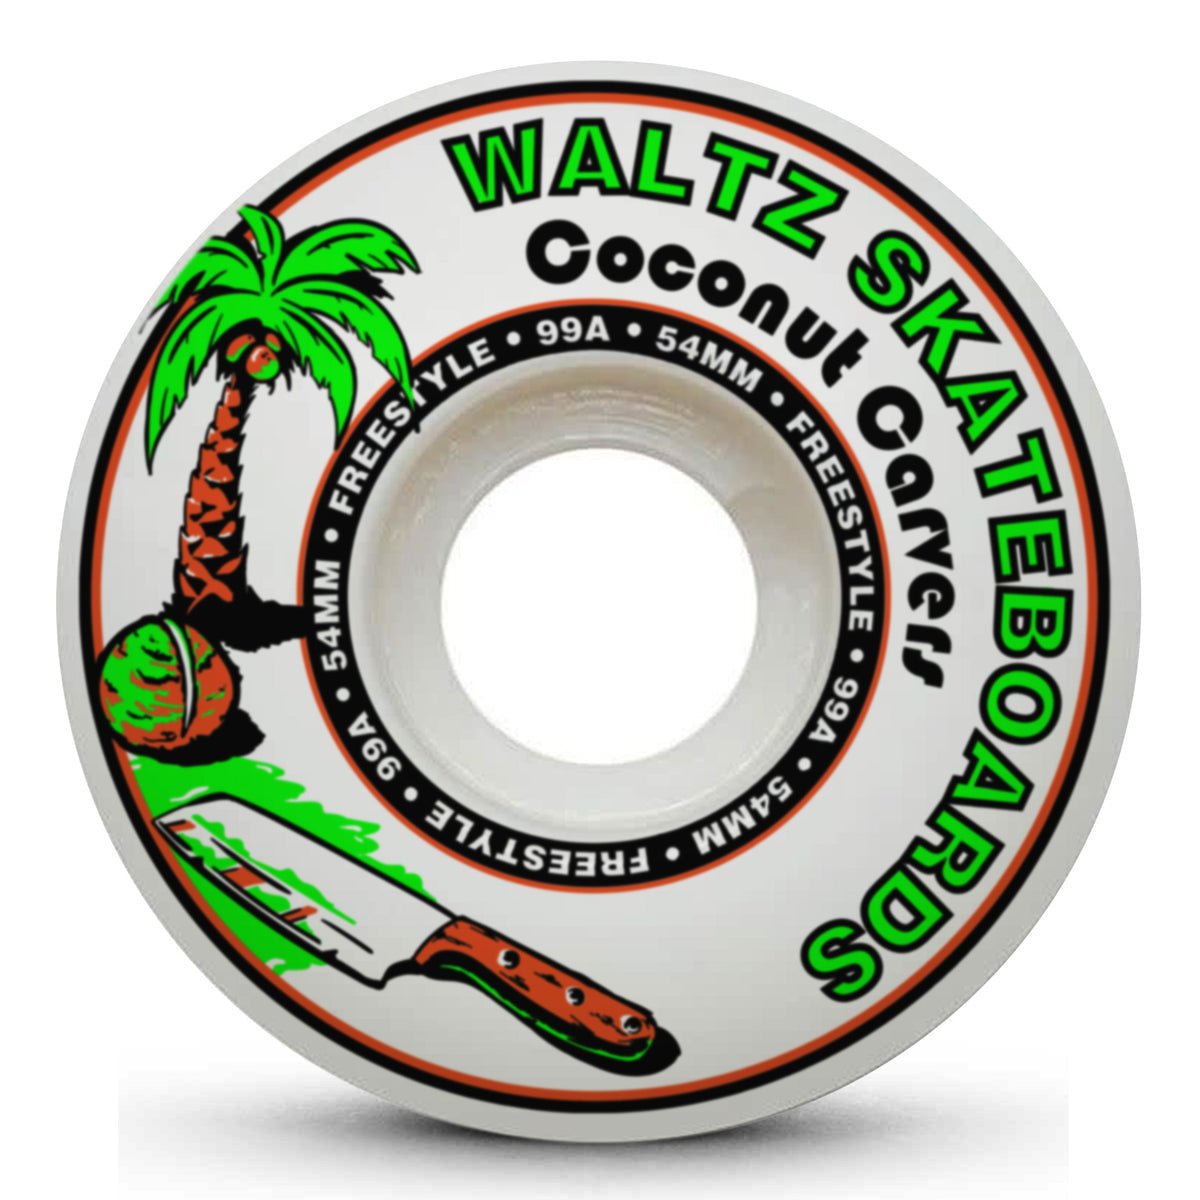 Waltz Coconut Carvers Freestyle 54mm / 99a (Natural) - Skateboard - Wheels